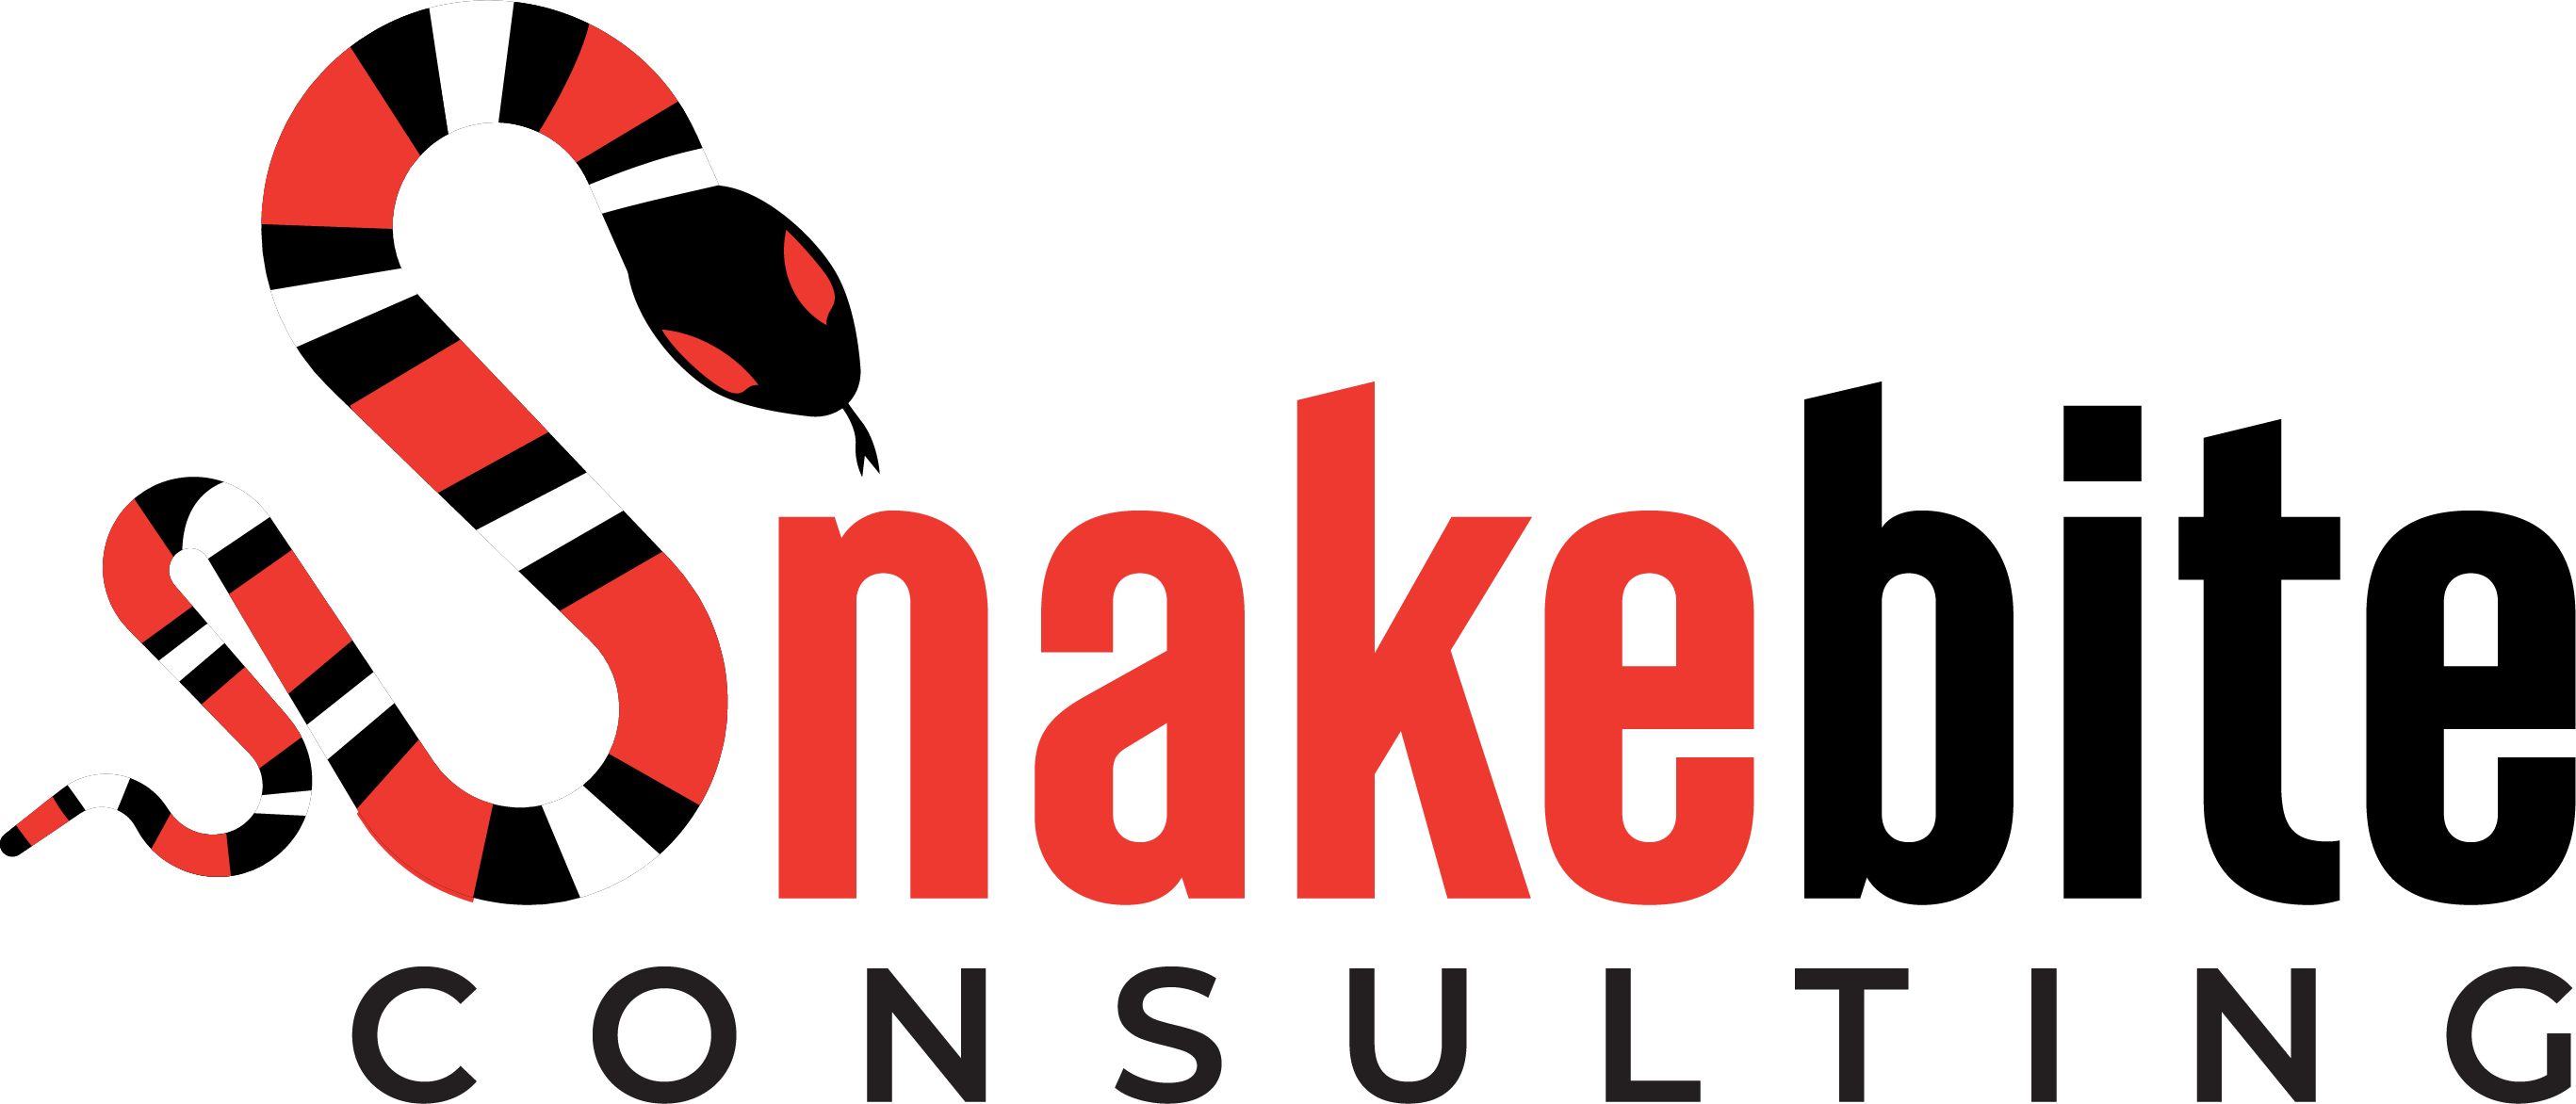 Snakebite Consulting logo with red, black, and white striped snake in the shape of an s, and red and black font